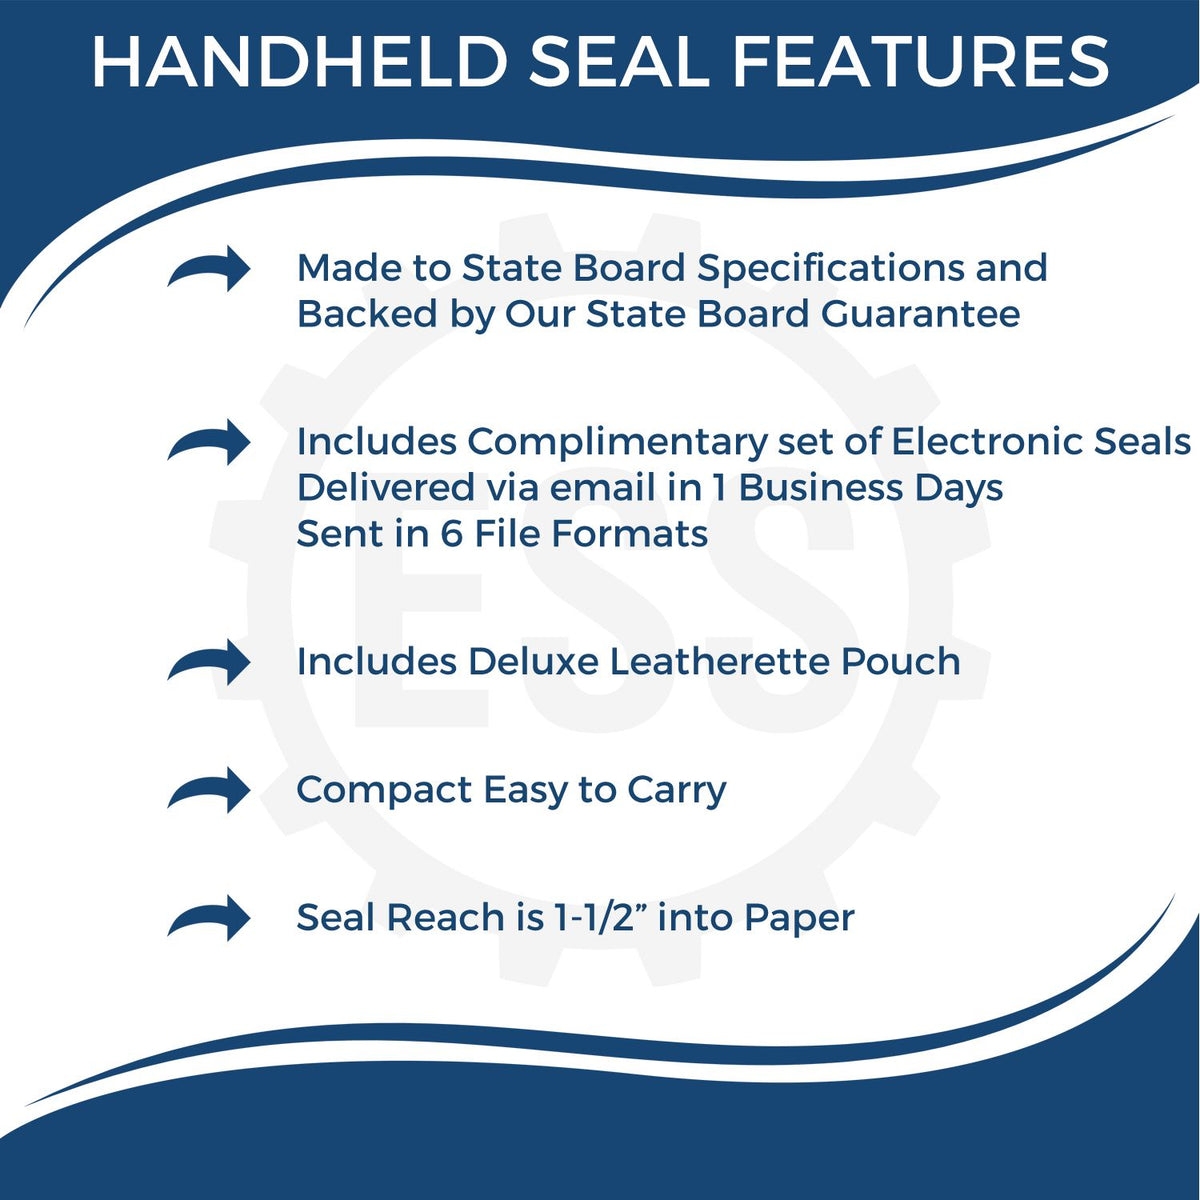 A picture of an infographic highlighting the selling points for the Handheld Georgia Land Surveyor Seal